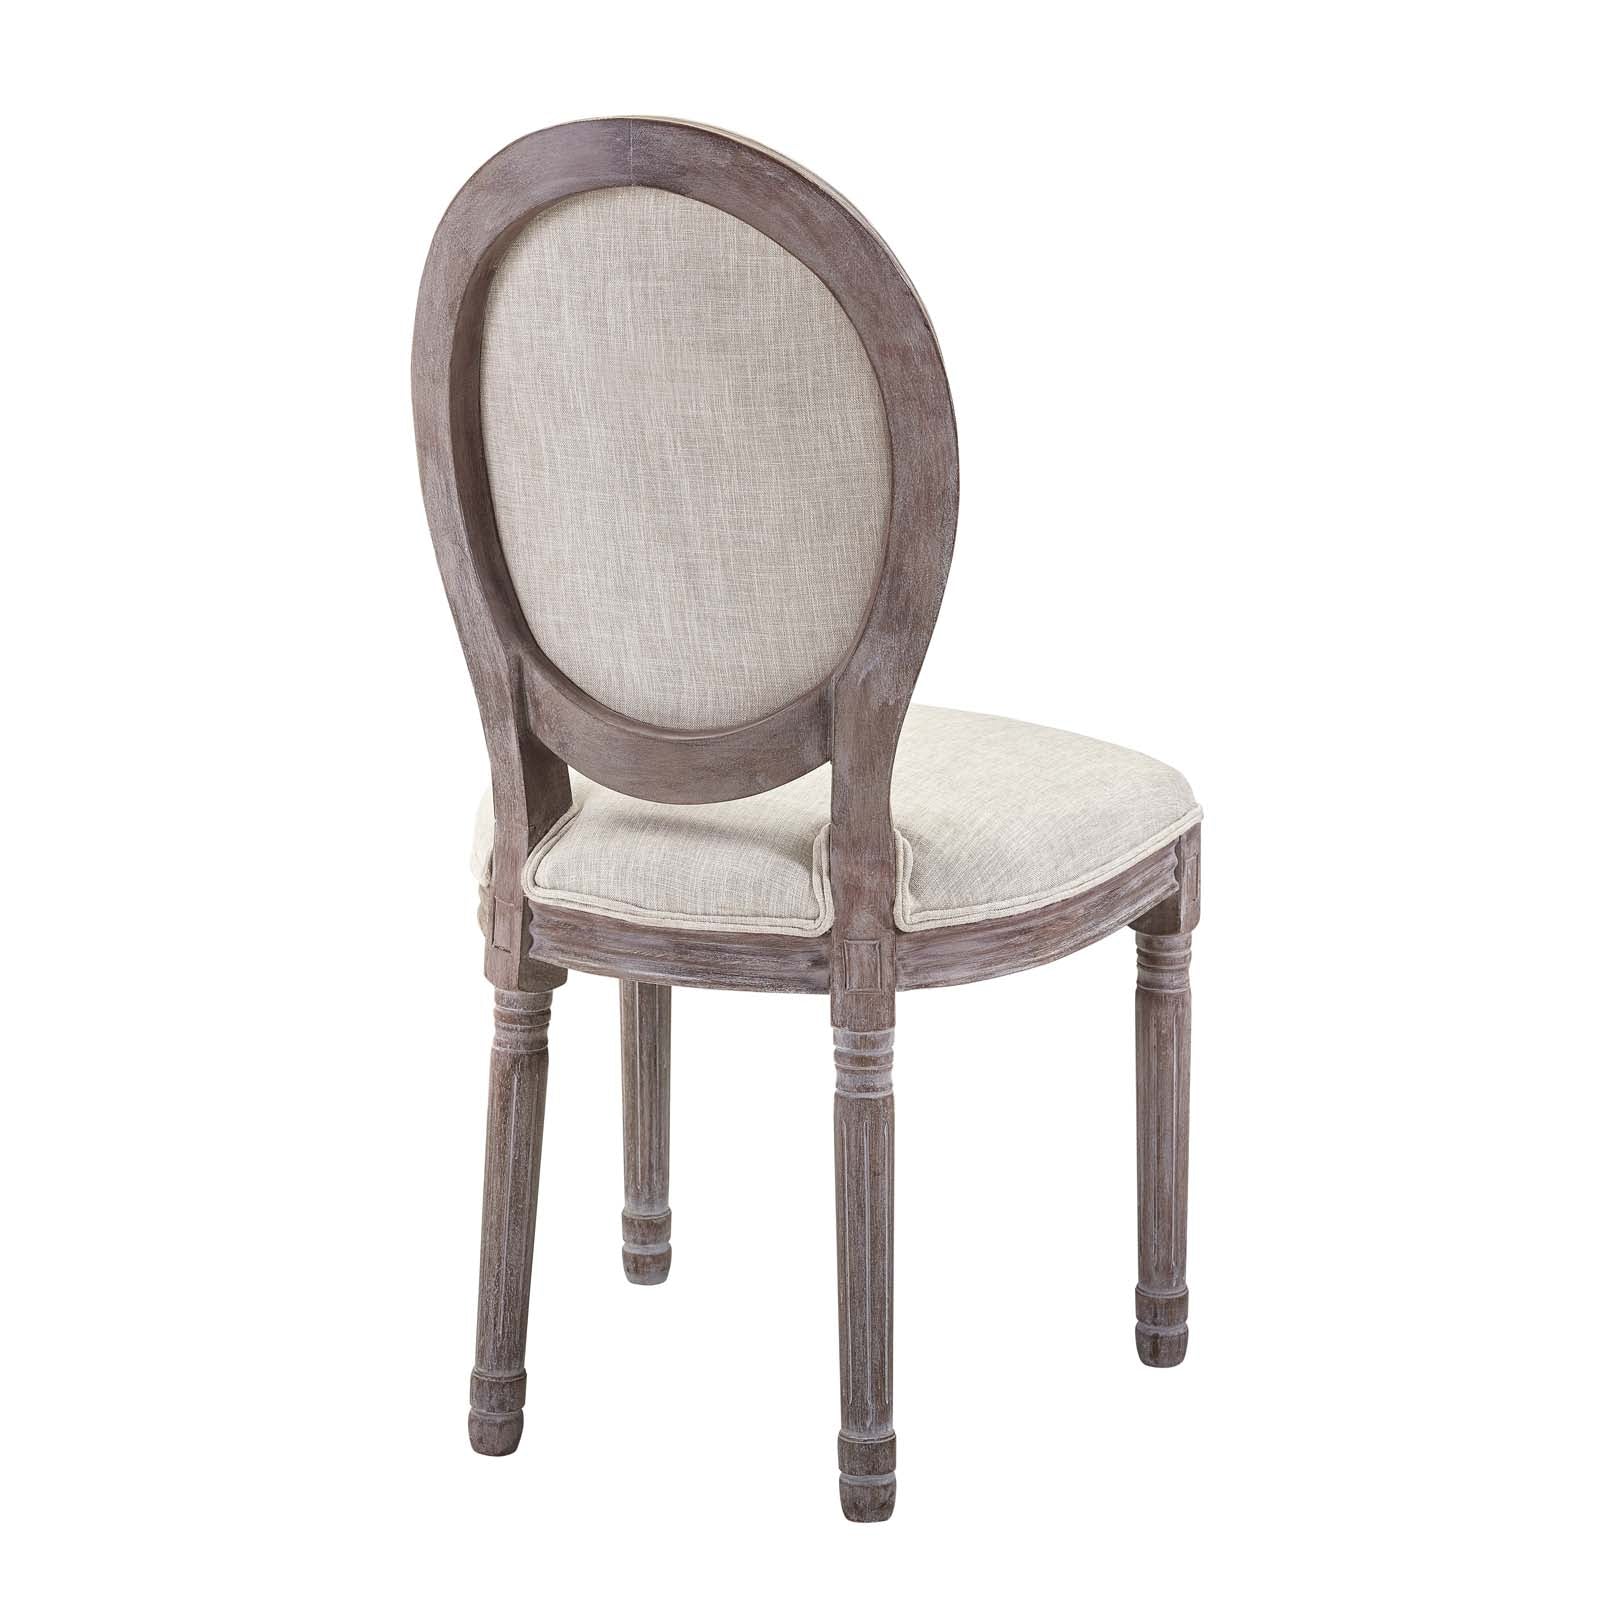 Arise Dining Side Chair Upholstered Fabric Set of 4 - East Shore Modern Home Furnishings